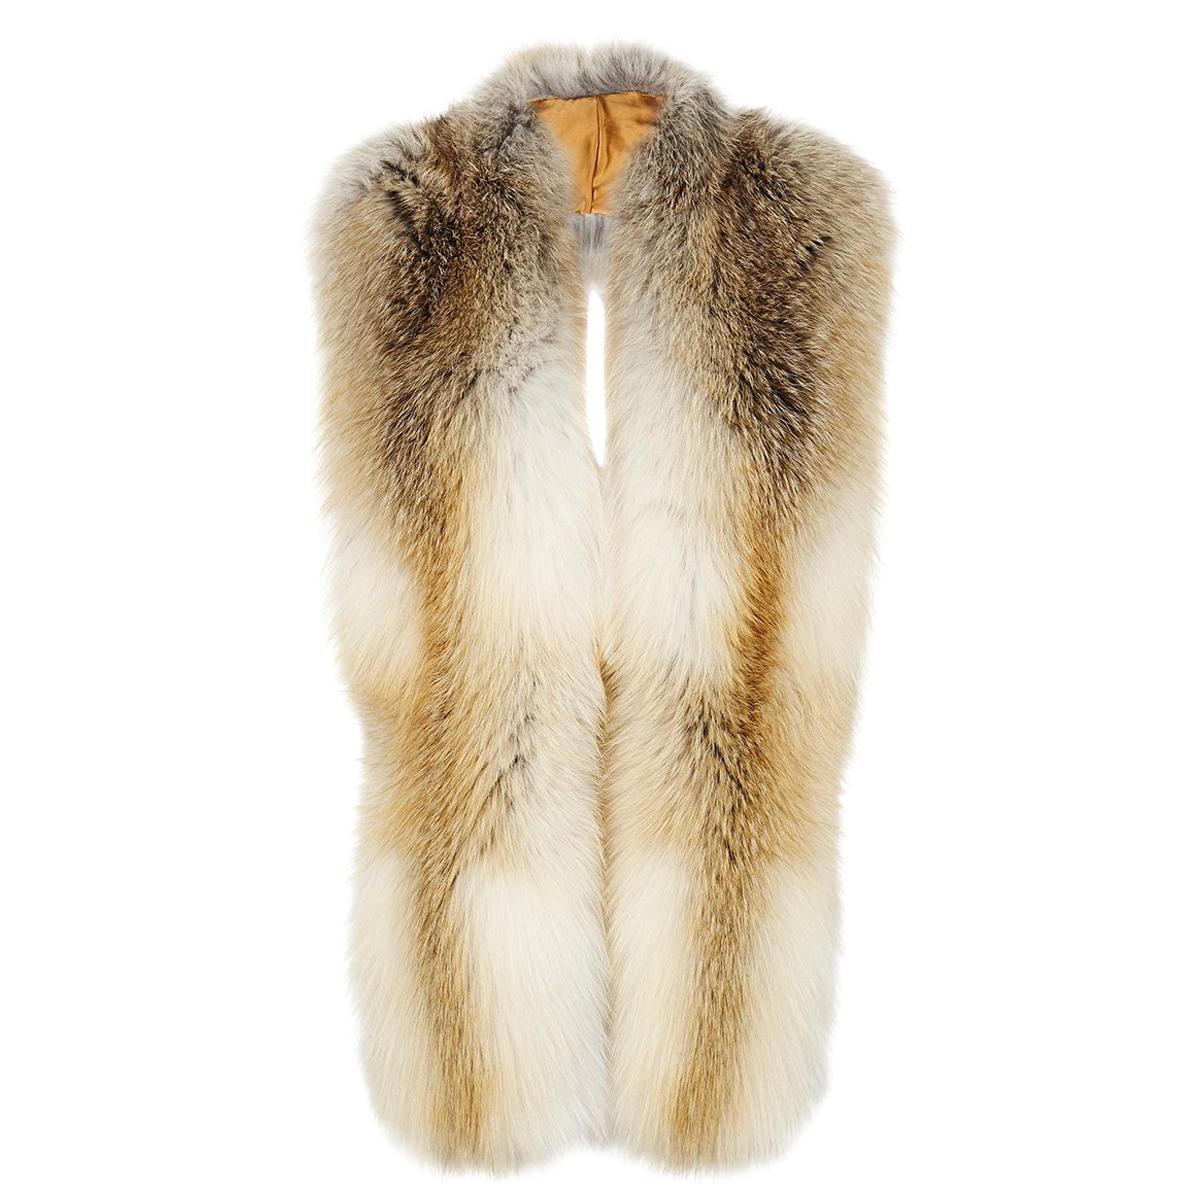 Verheyen London Legacy Stole Natural Golden Island Fox Fur - Brand New  (RRP Price)

This Natural Collection is Verheyen London’s versatile collection for country or city wear, crafted in the finest and highest quality origin assured natural fox.  A